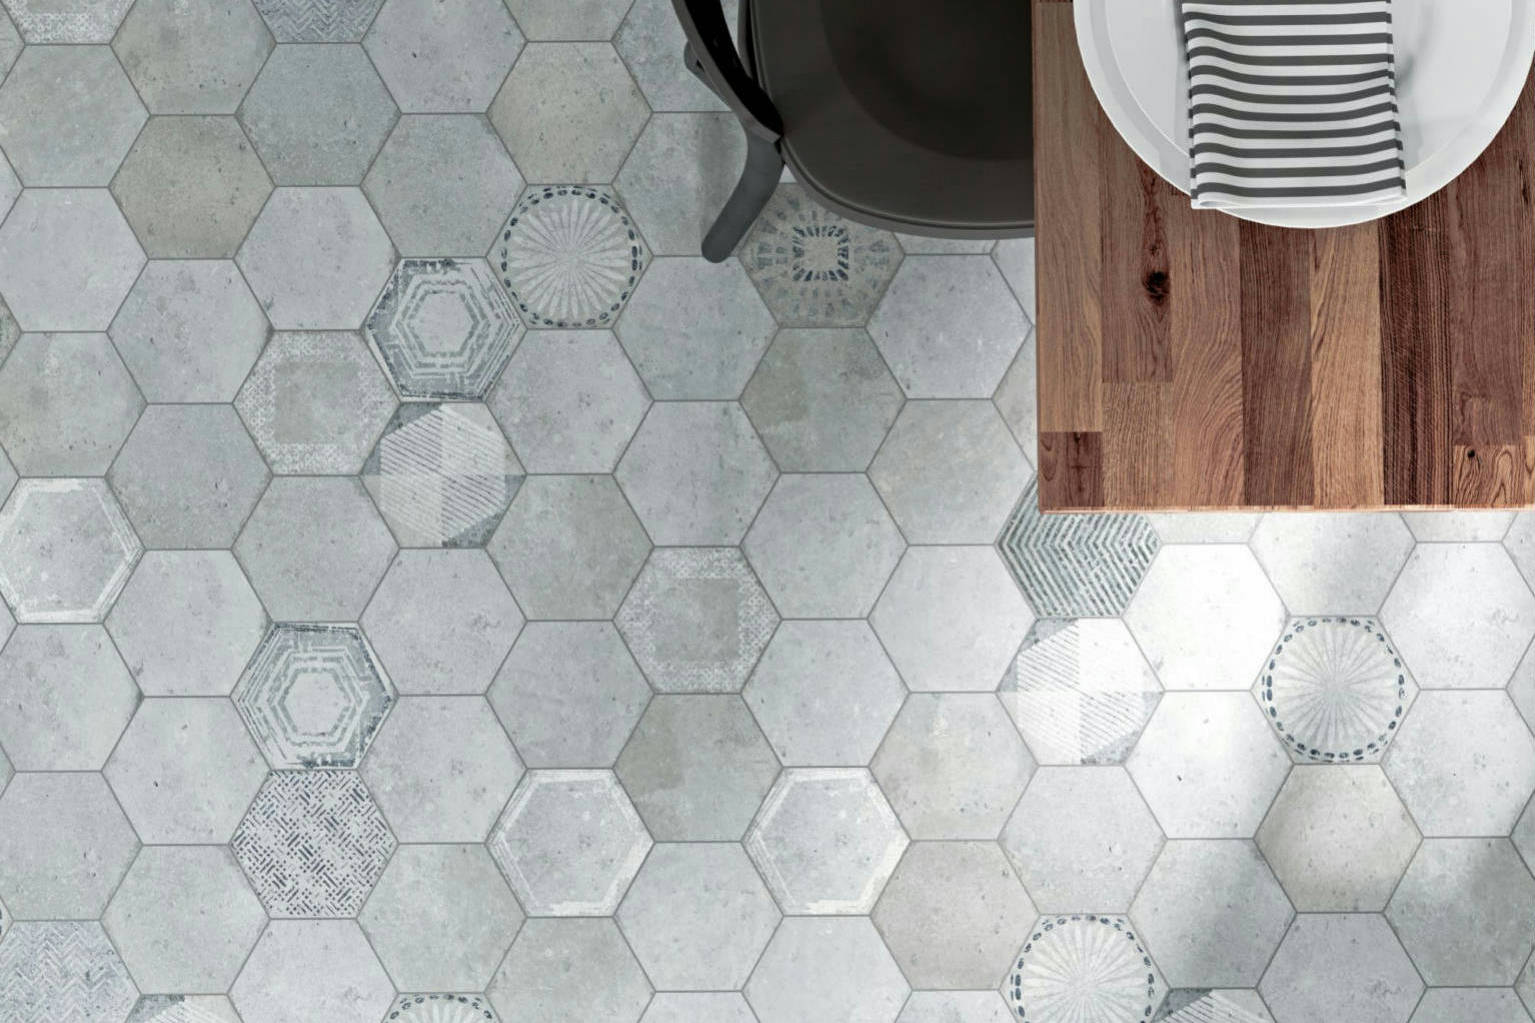 Alma 5.5x6.3” Grey and Grey Decor Hexagon | Qualis Ceramica | Luxury Tile and Vinyl at affordable prices